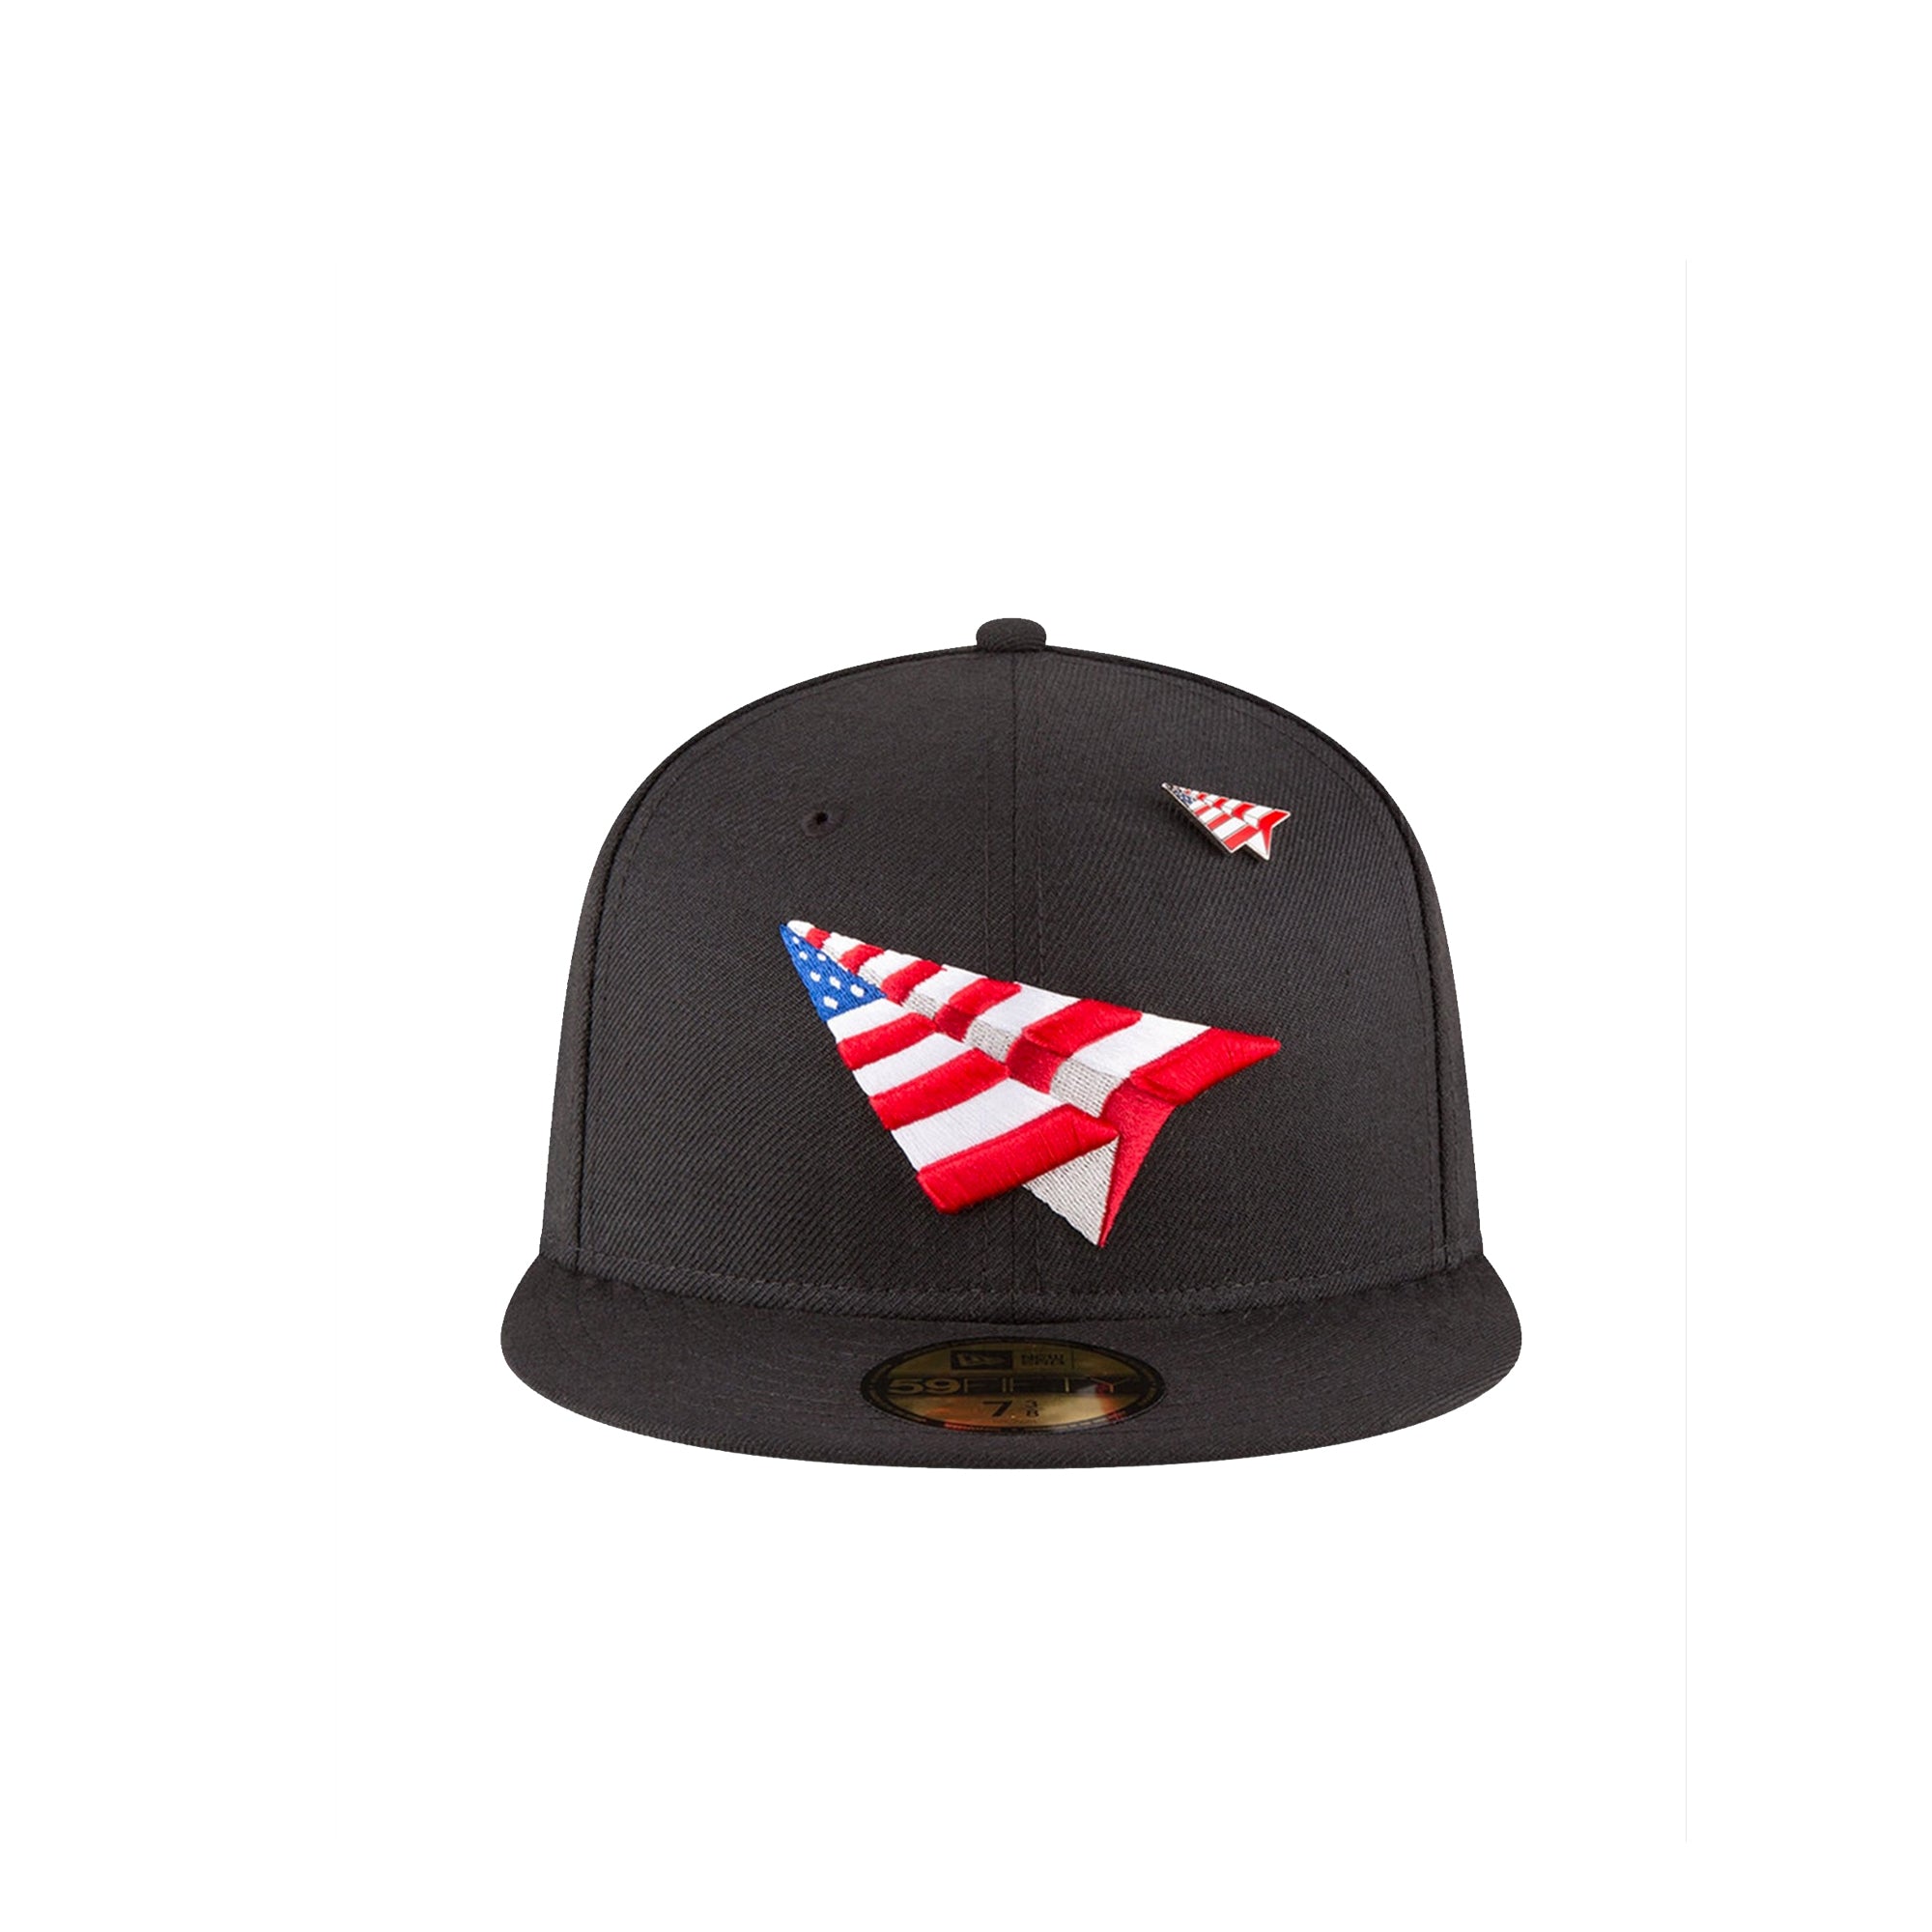 Paper Planes Mens American Dream Black Crown Fitted